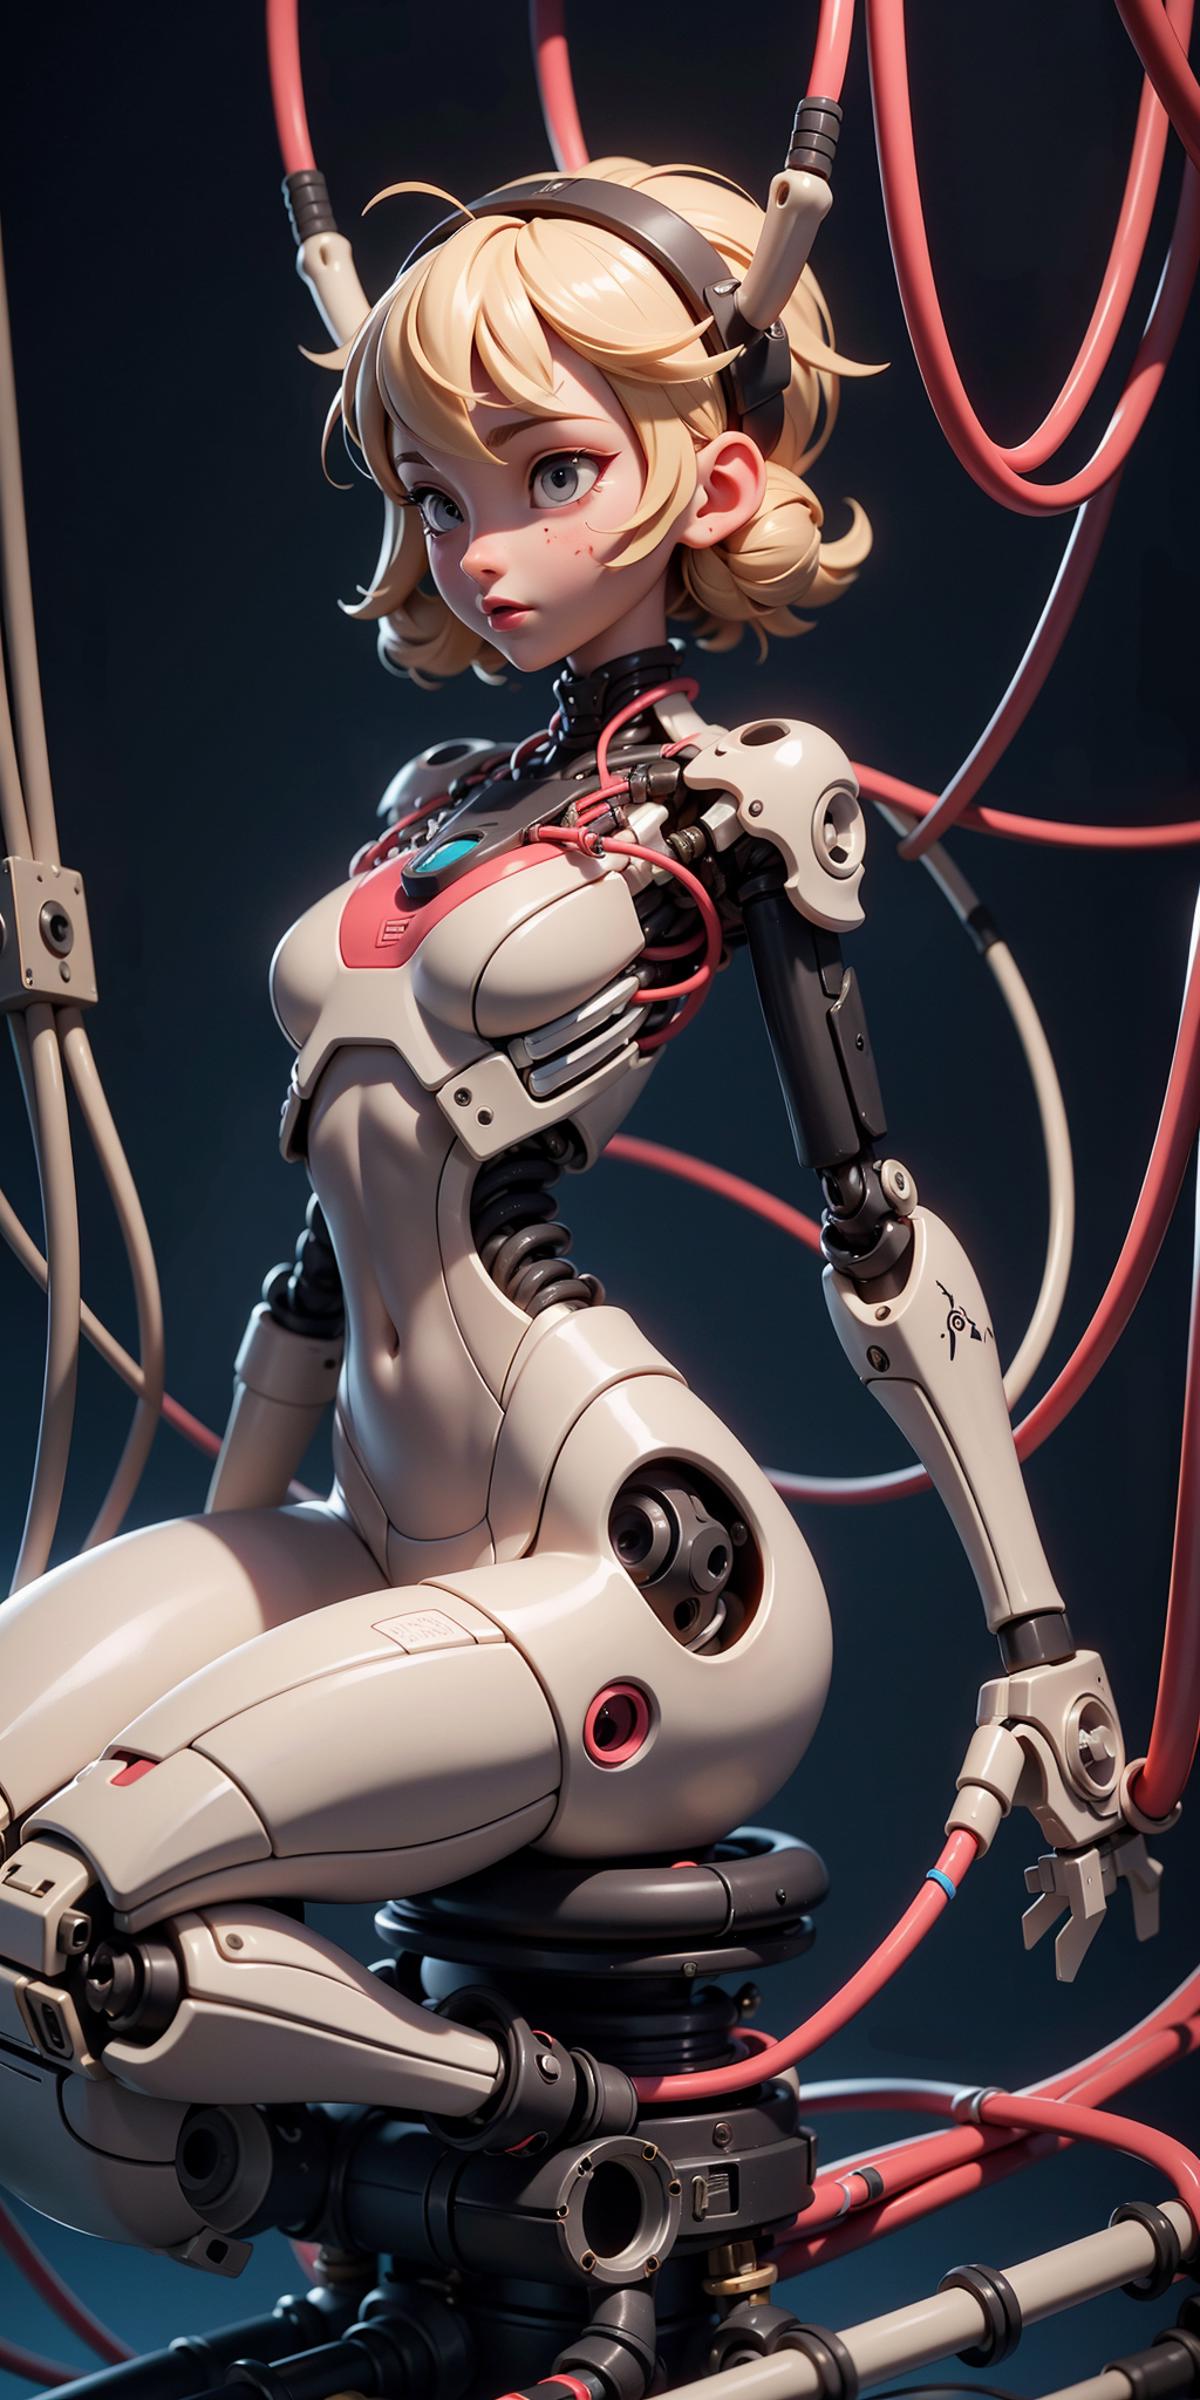 A robotic woman with a red neckline and pink wires.